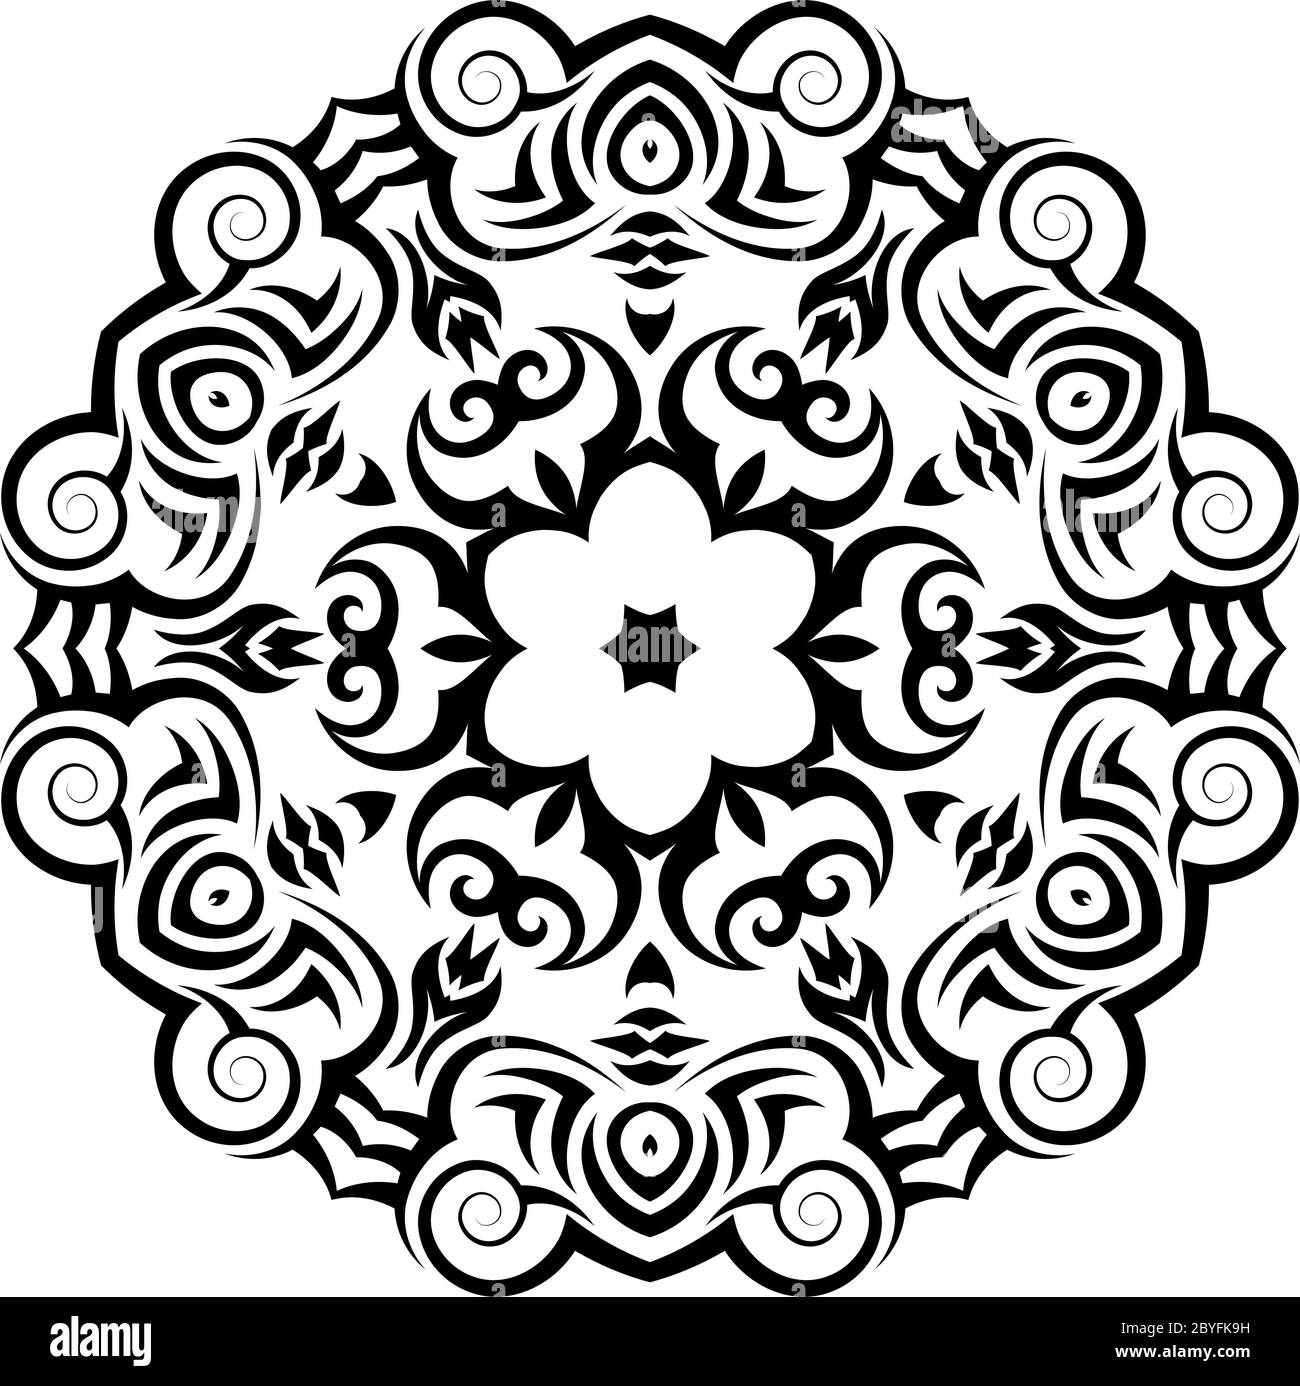 Tribal art india Cut Out Stock Images & Pictures - Alamy